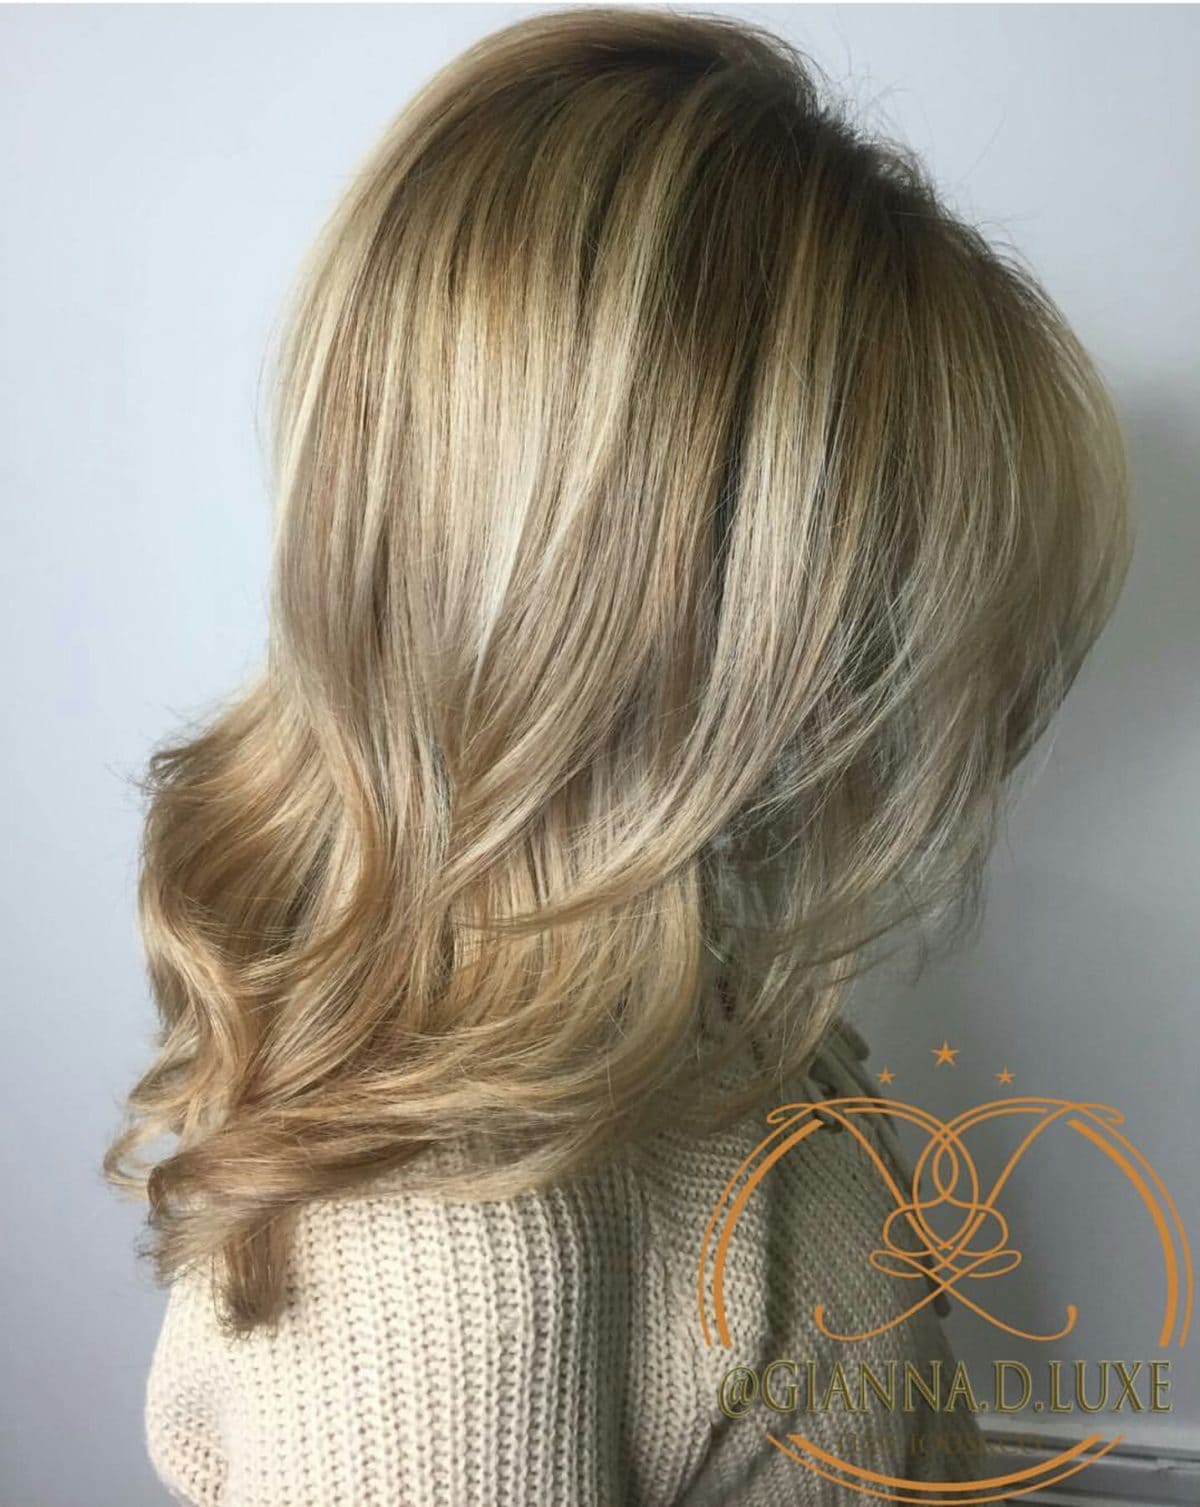 Luscious and Co. Beauty - Shelton, CT, US, hair lounge